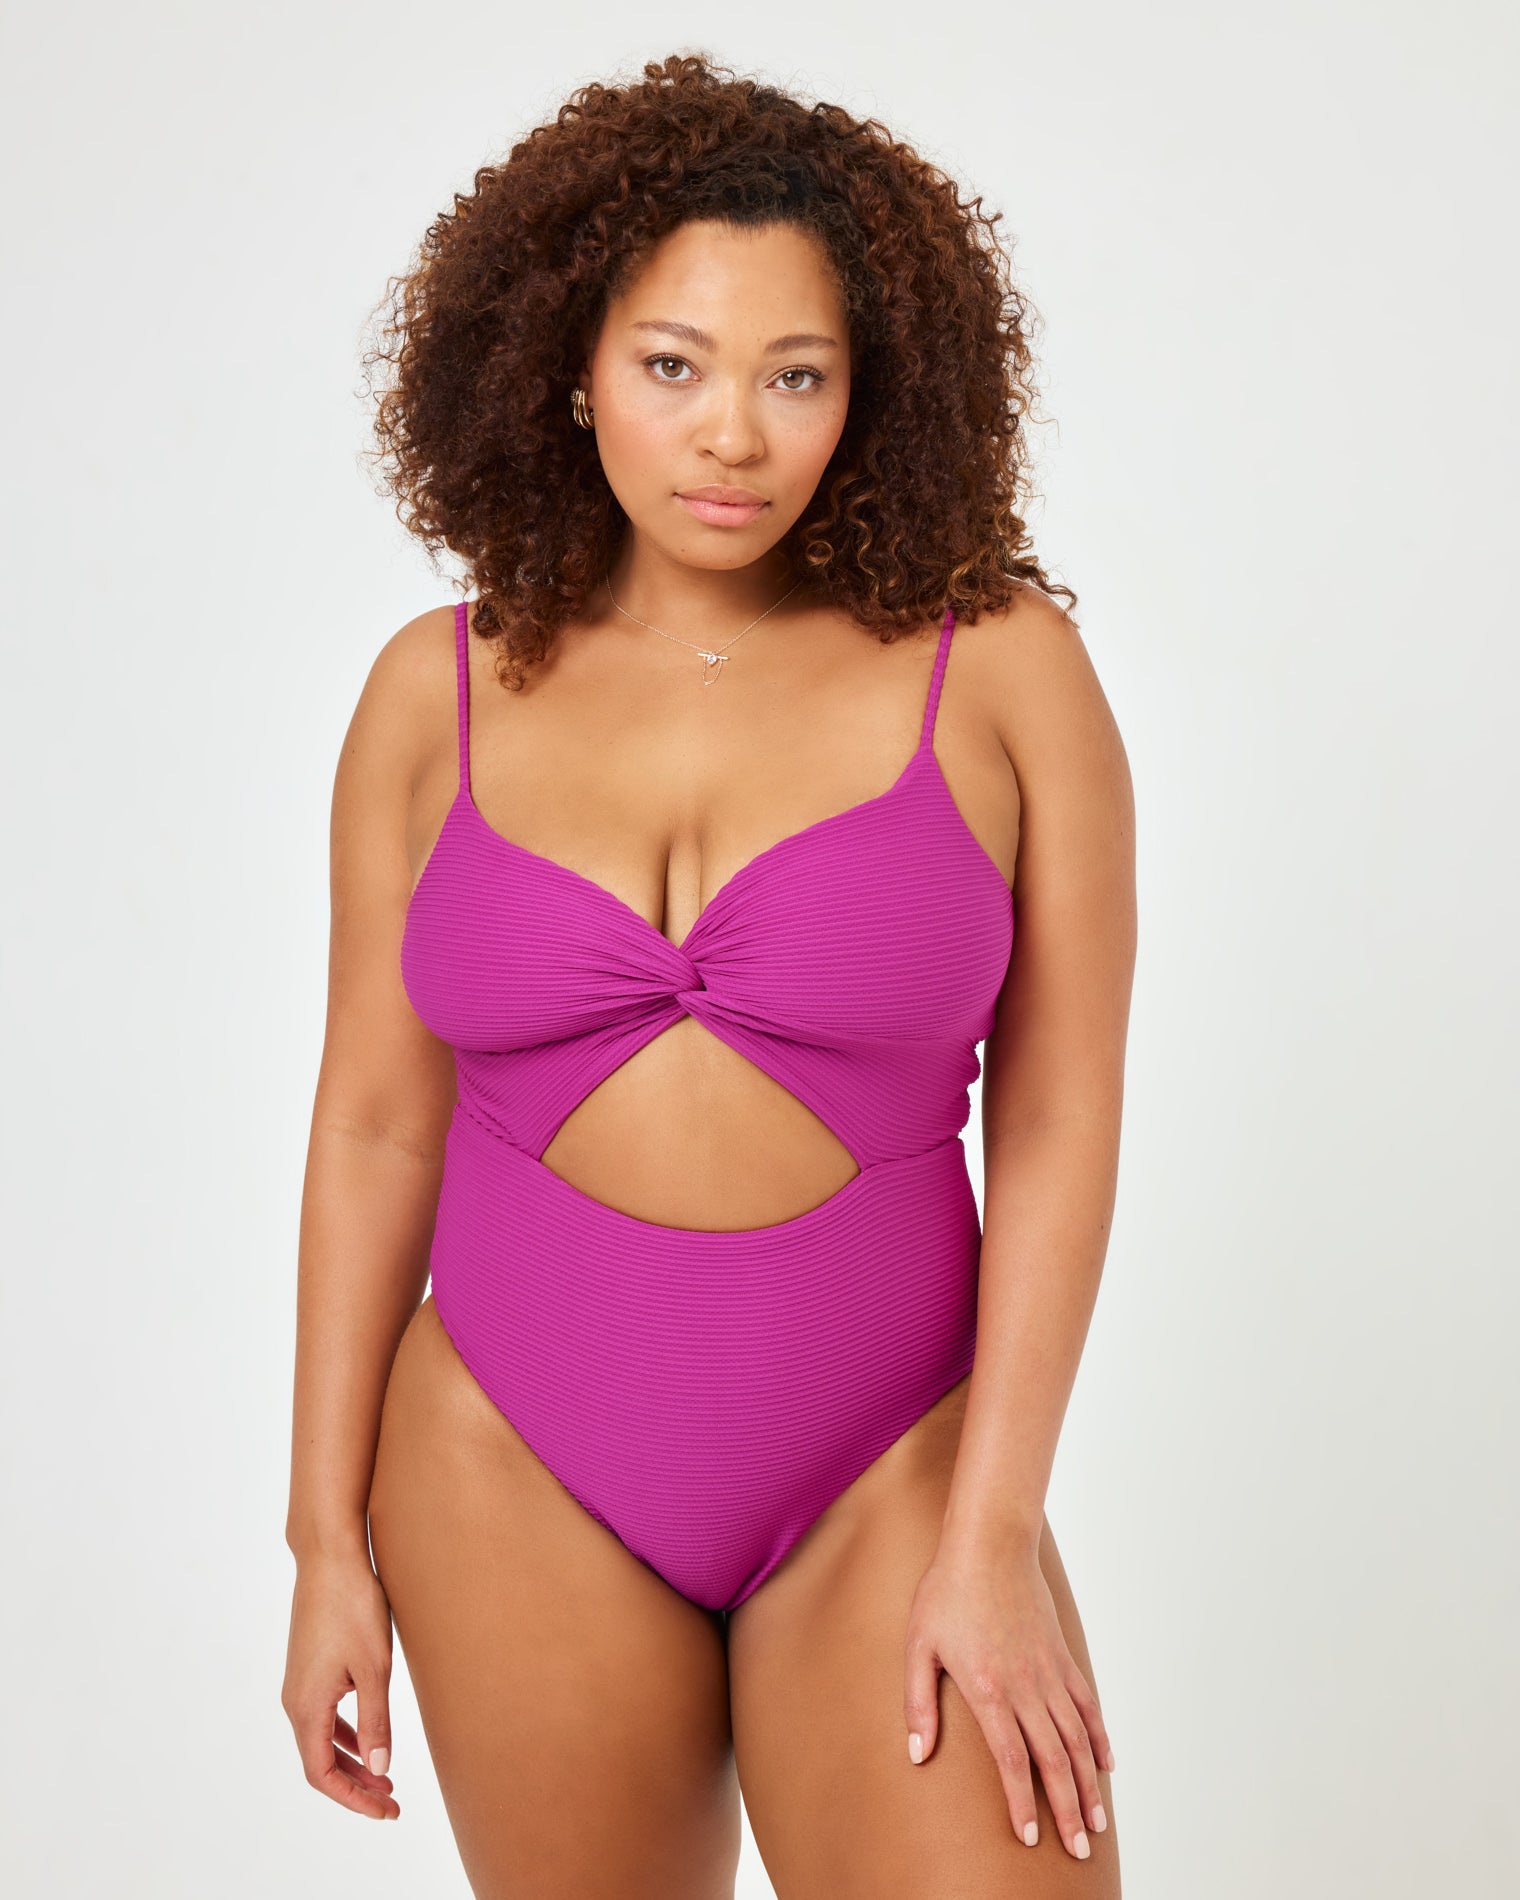 Eco Chic Repreve® Kyslee One Piece Swimsuit - Berry Berry | Model: Amber (size: XL) Badge:Eco Chic_#B2AC88_#ffffff